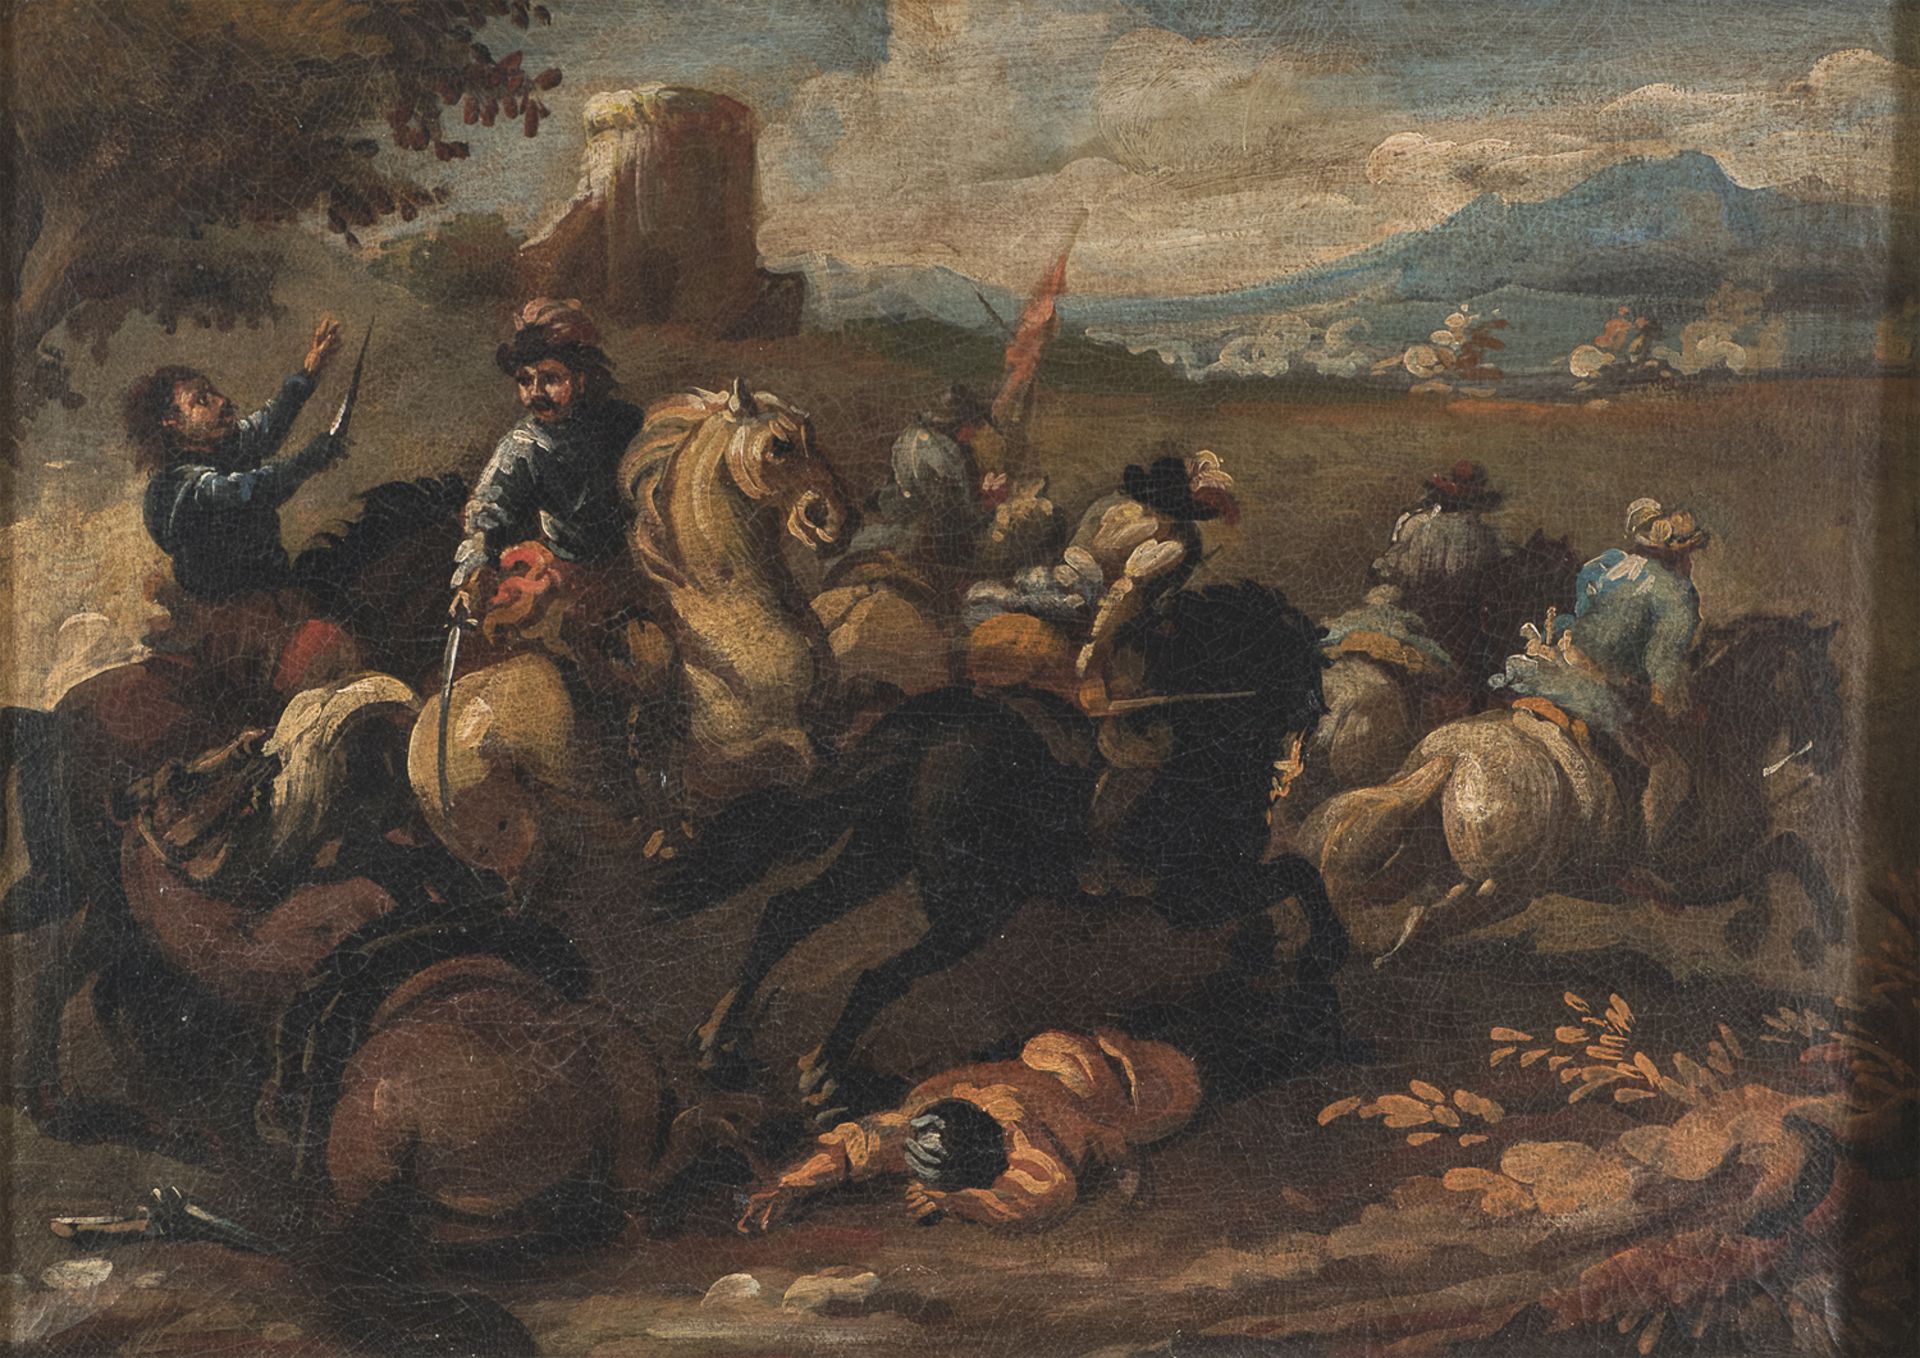 OIL PAINTING OF KNIGHTS' ATTACK LATE 18TH CENTURY